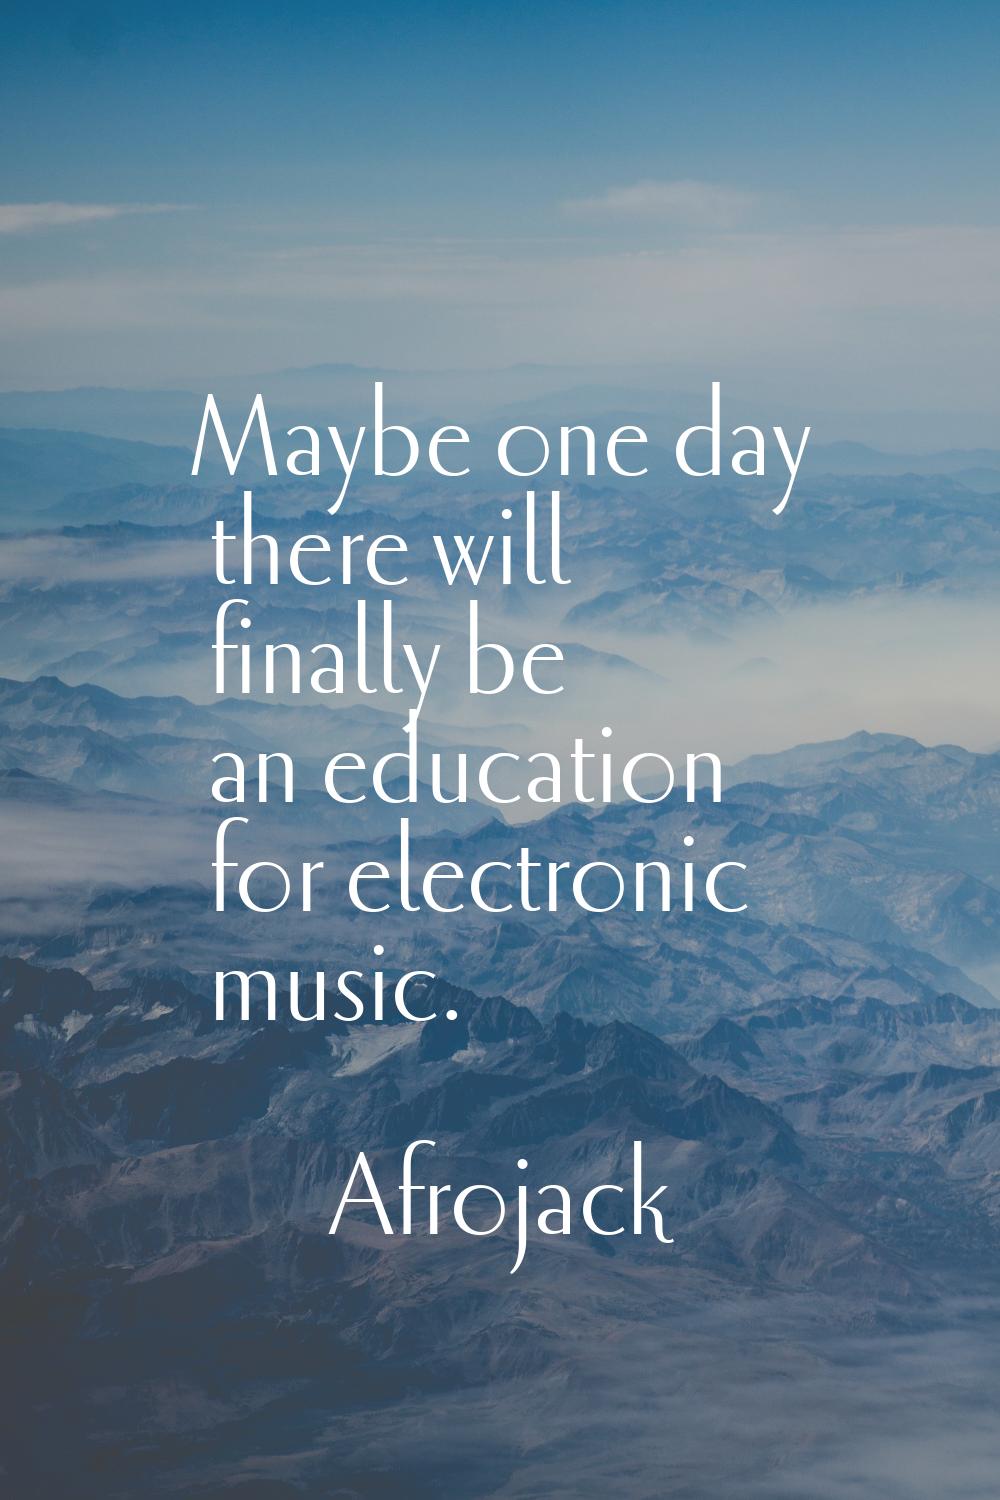 Maybe one day there will finally be an education for electronic music.